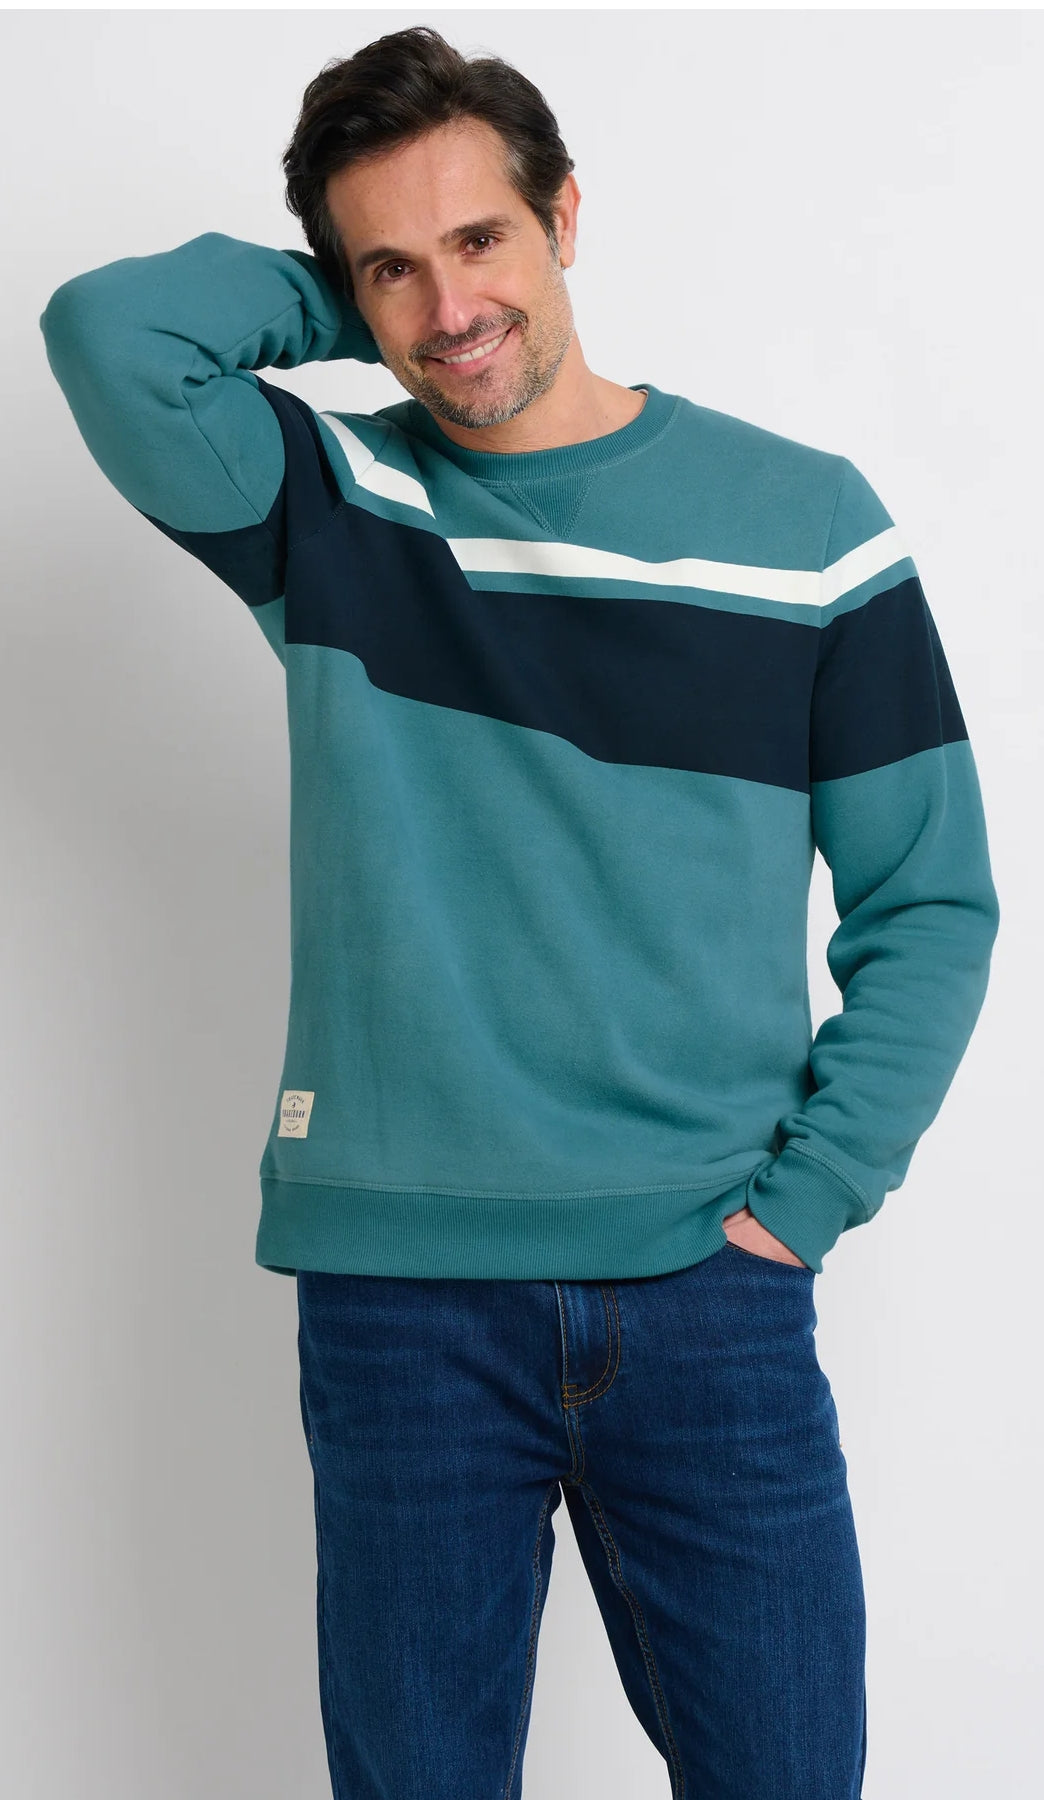 Men's crew neck sweatshirt with panel stripes across the chest and sleeves from Brakeburn